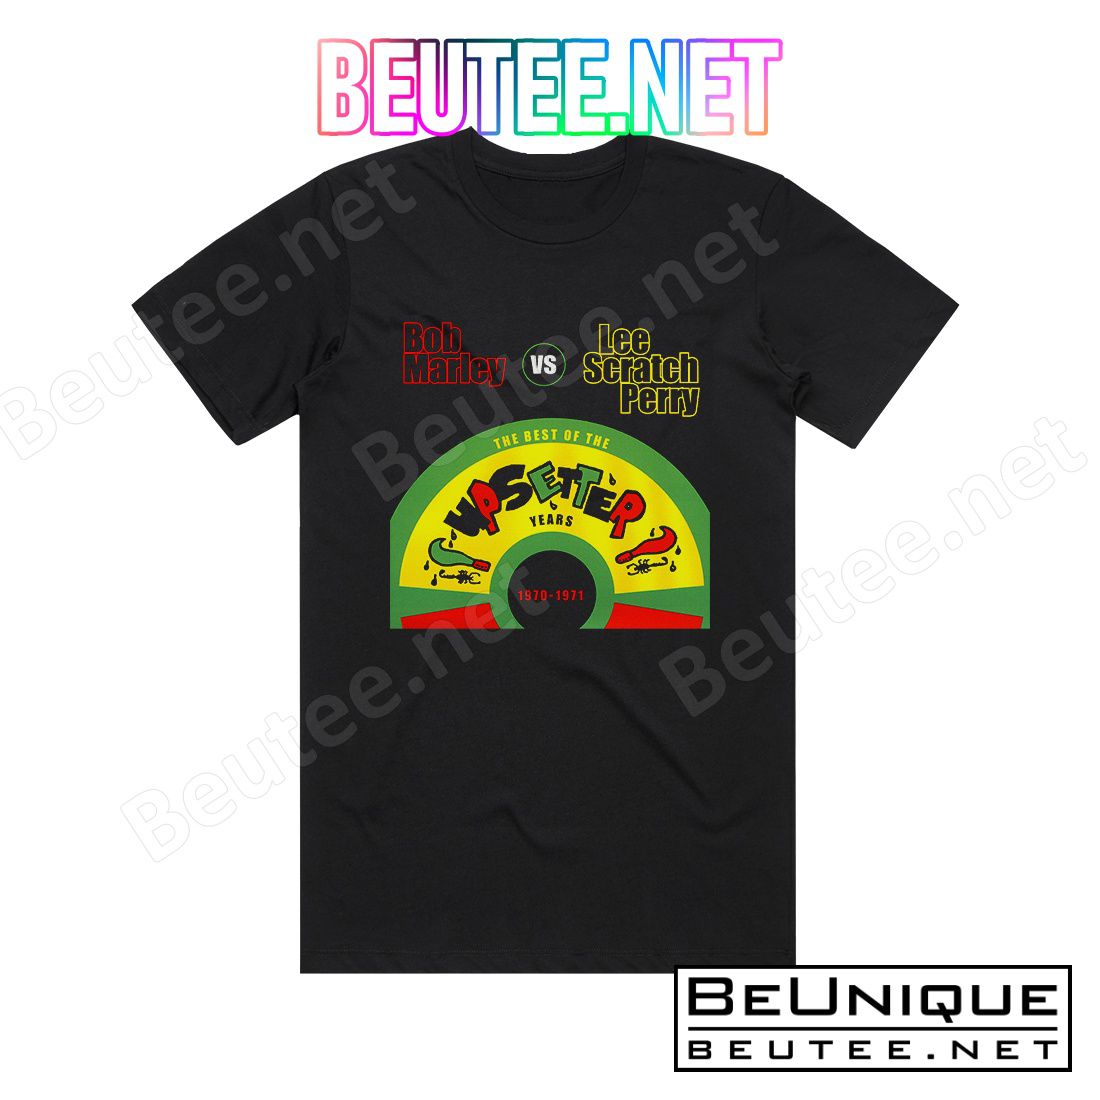 Bob Marley The Best Of The Upsetter Years 1970 1971 Bob Marley Vs Lee S Album Cover T-Shirt